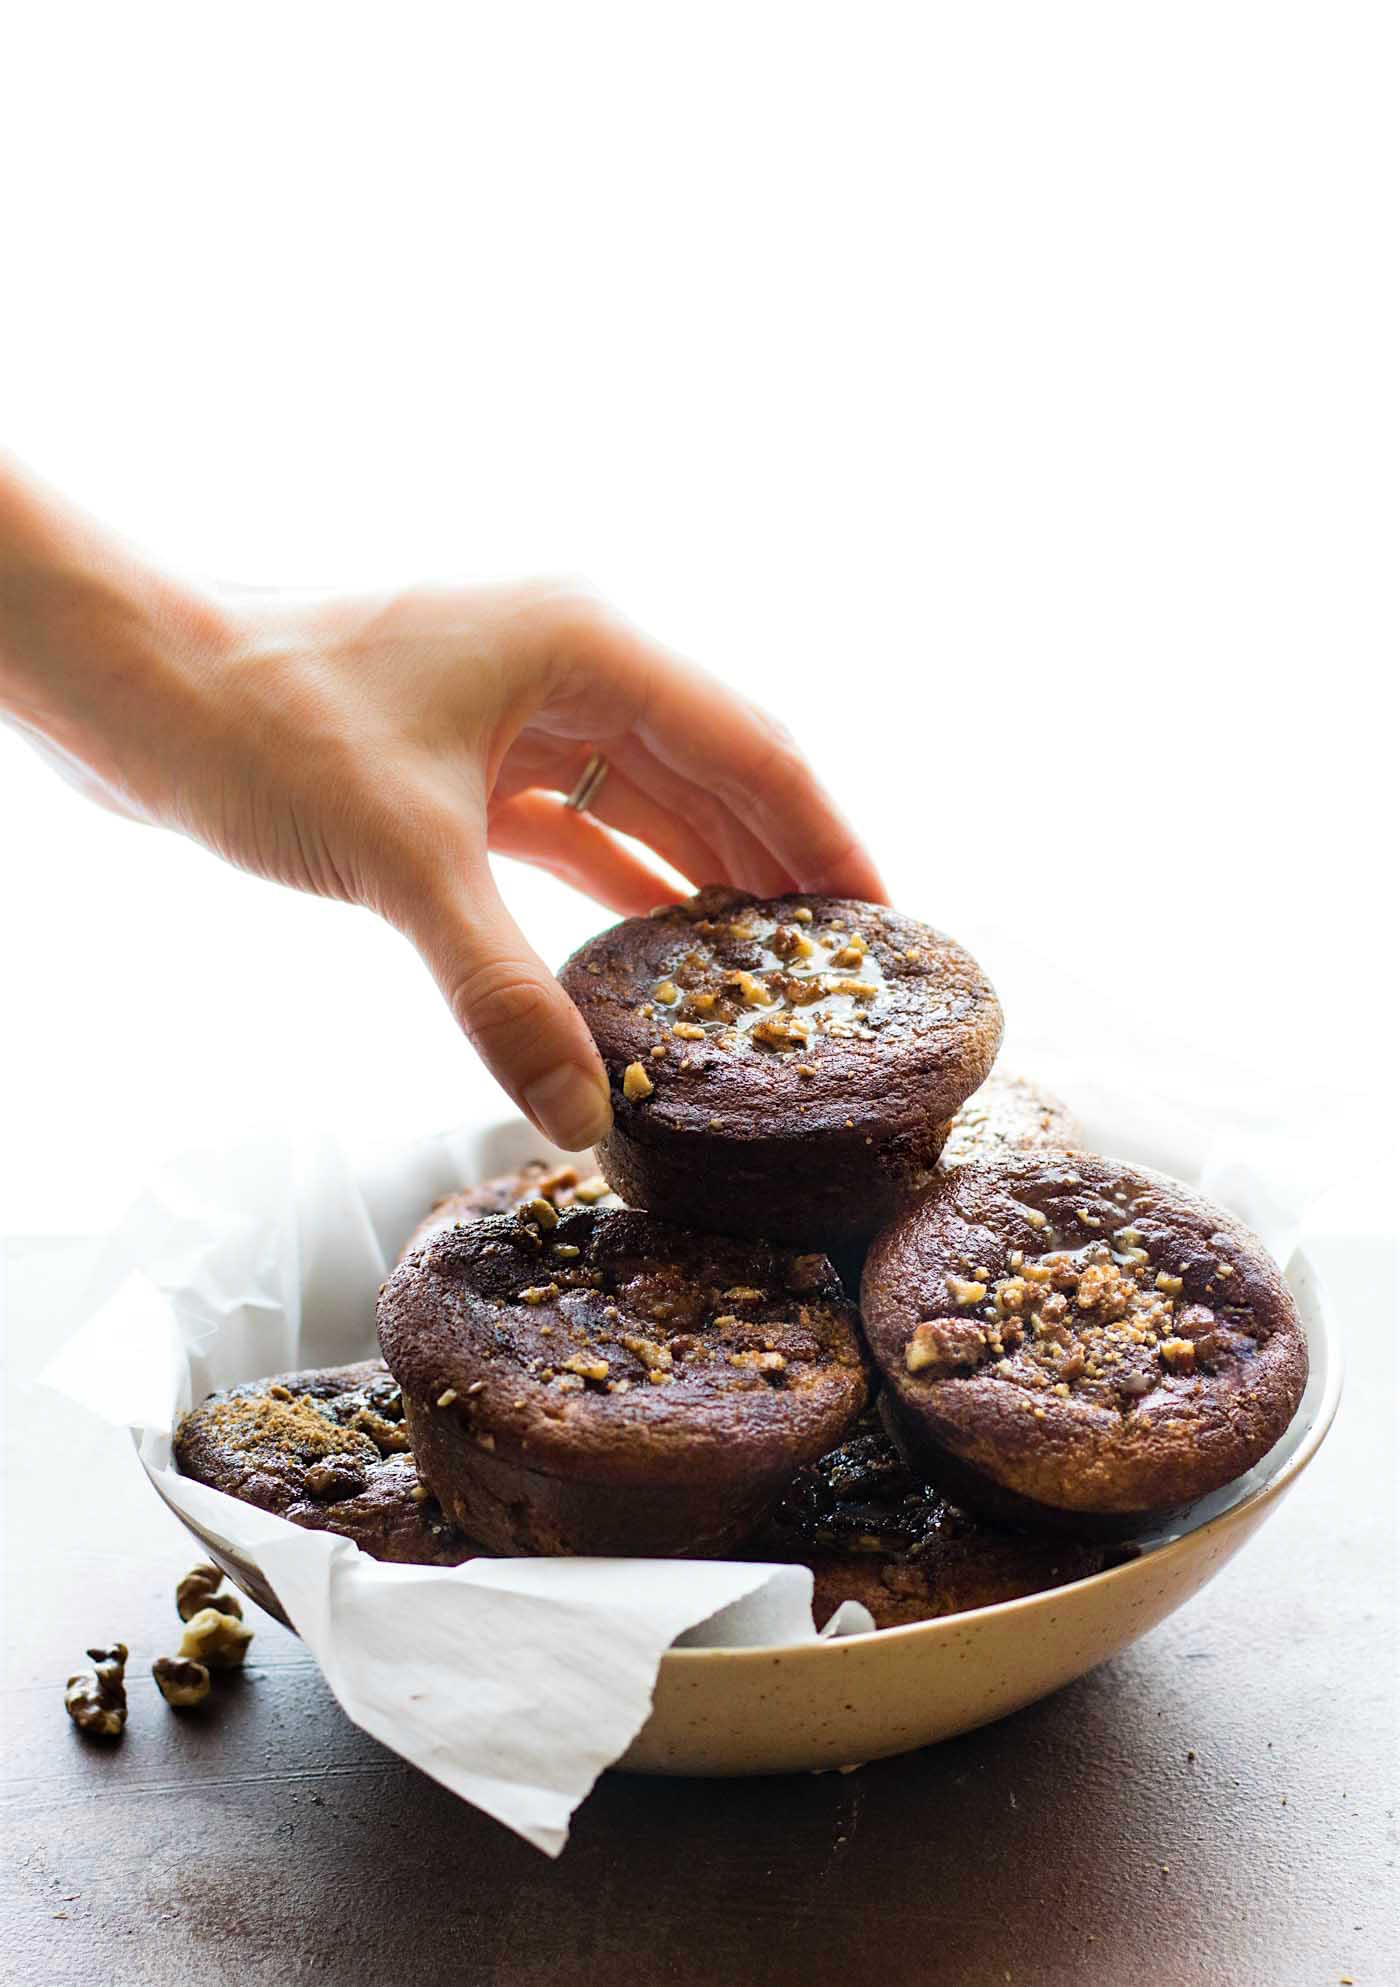 A coffee cake muffin with sticky nut topping being picked up from a serving bowl filled with gluten-free muffins.